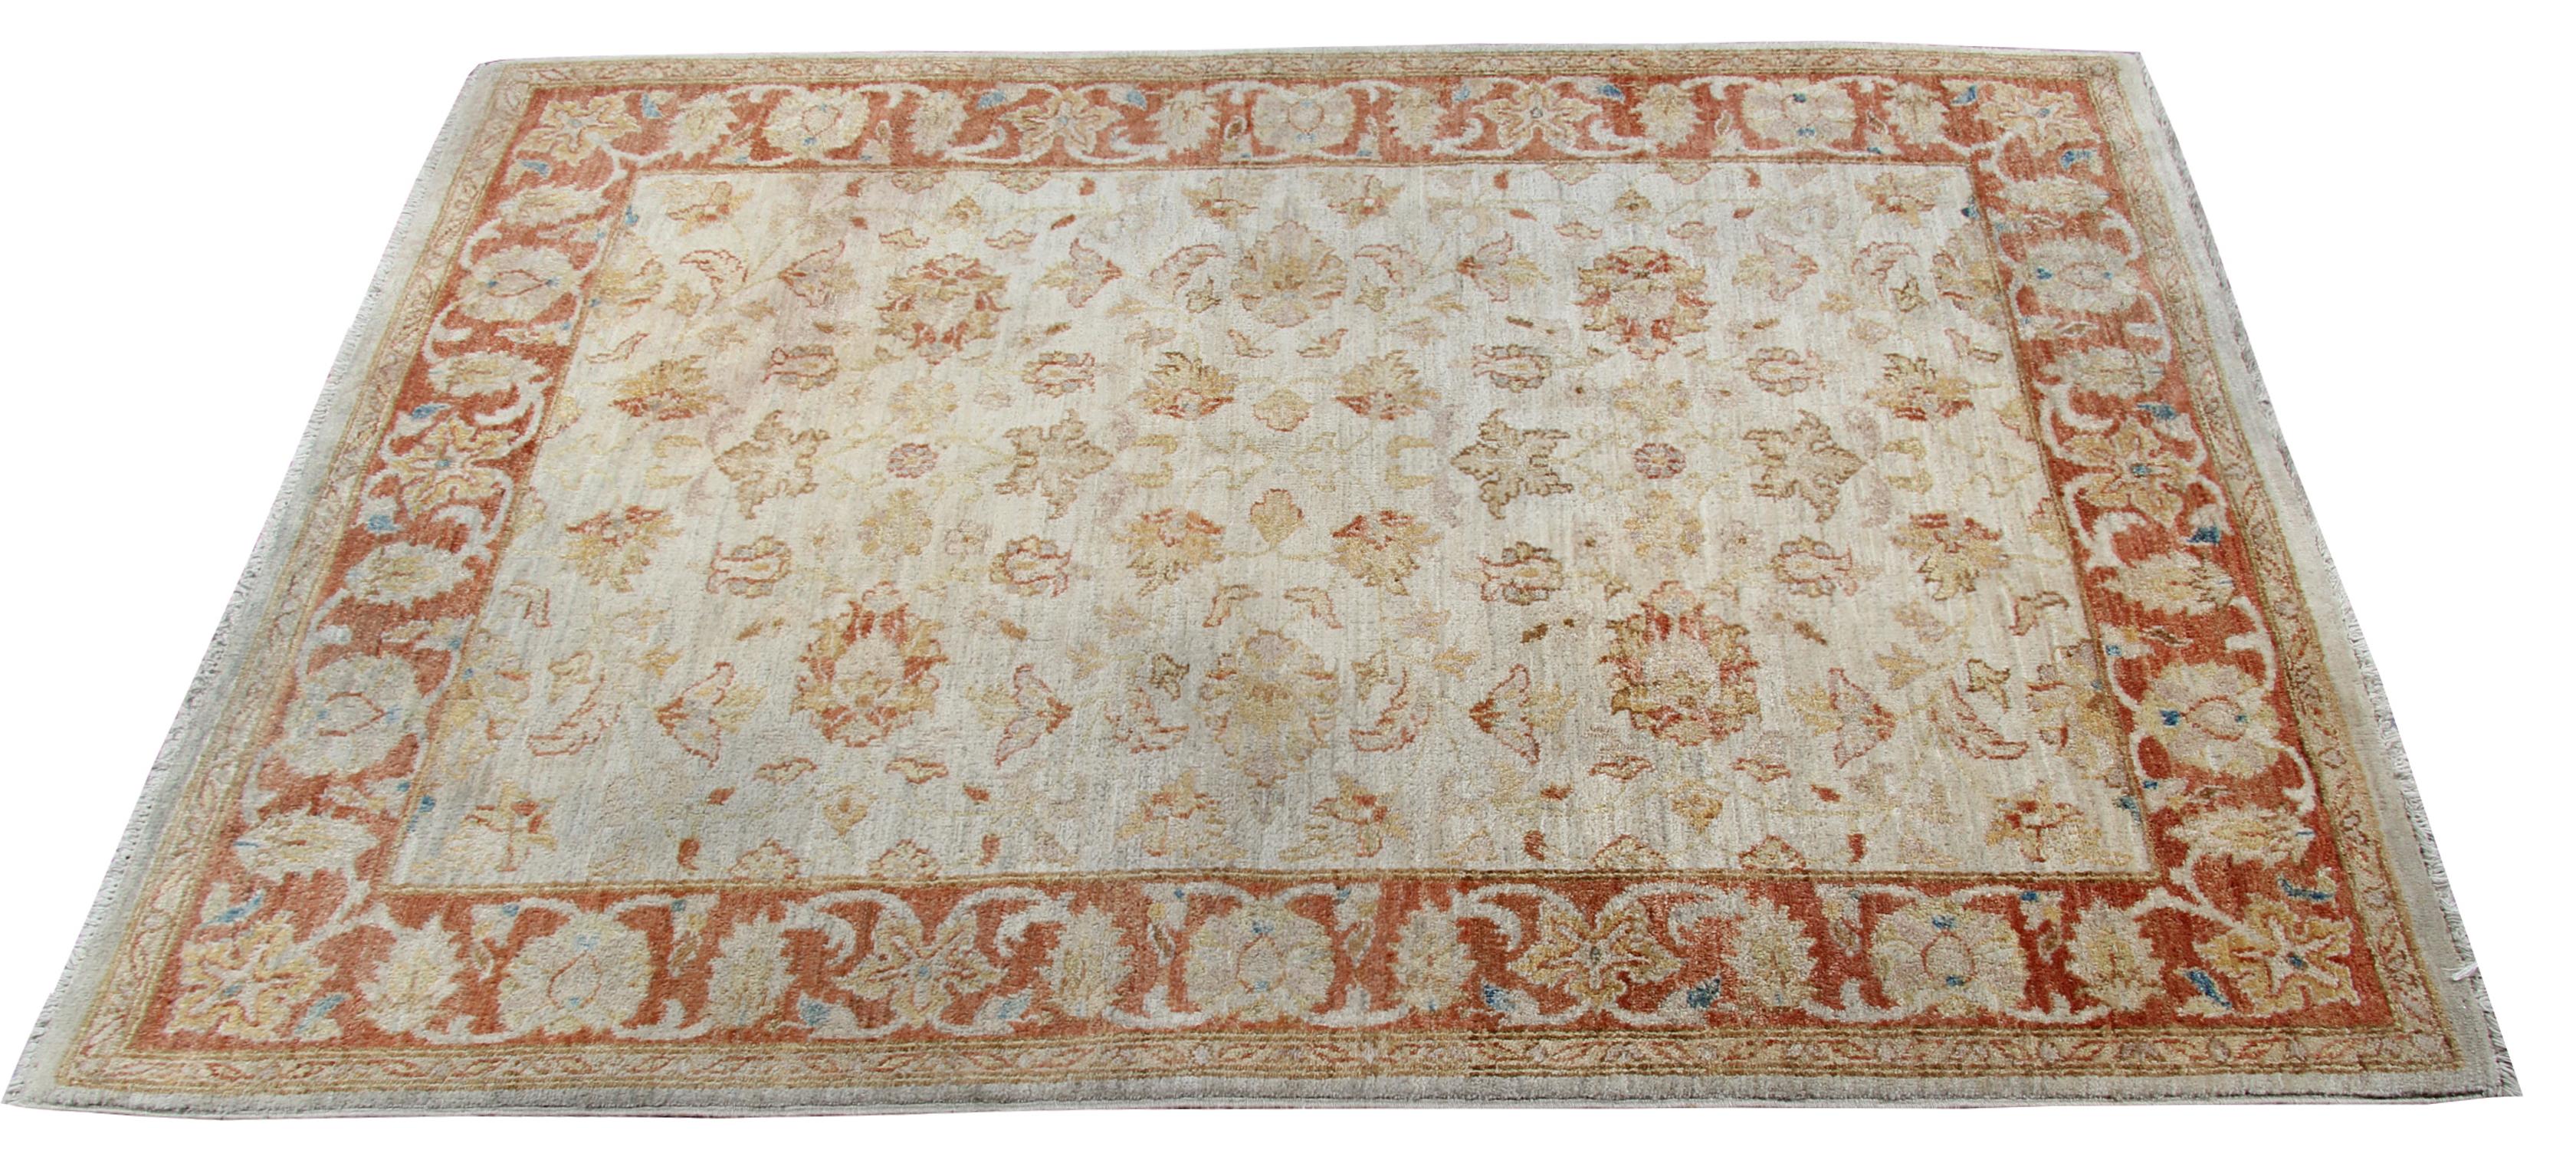 This oriental rug is an example of handmade rugs in Afghanistan by skilled weavers. Handspun wool is used with natural dyes then the rug is professionally washed and finished. These traditional rugs are kind of our luxury rugs made of own looms by